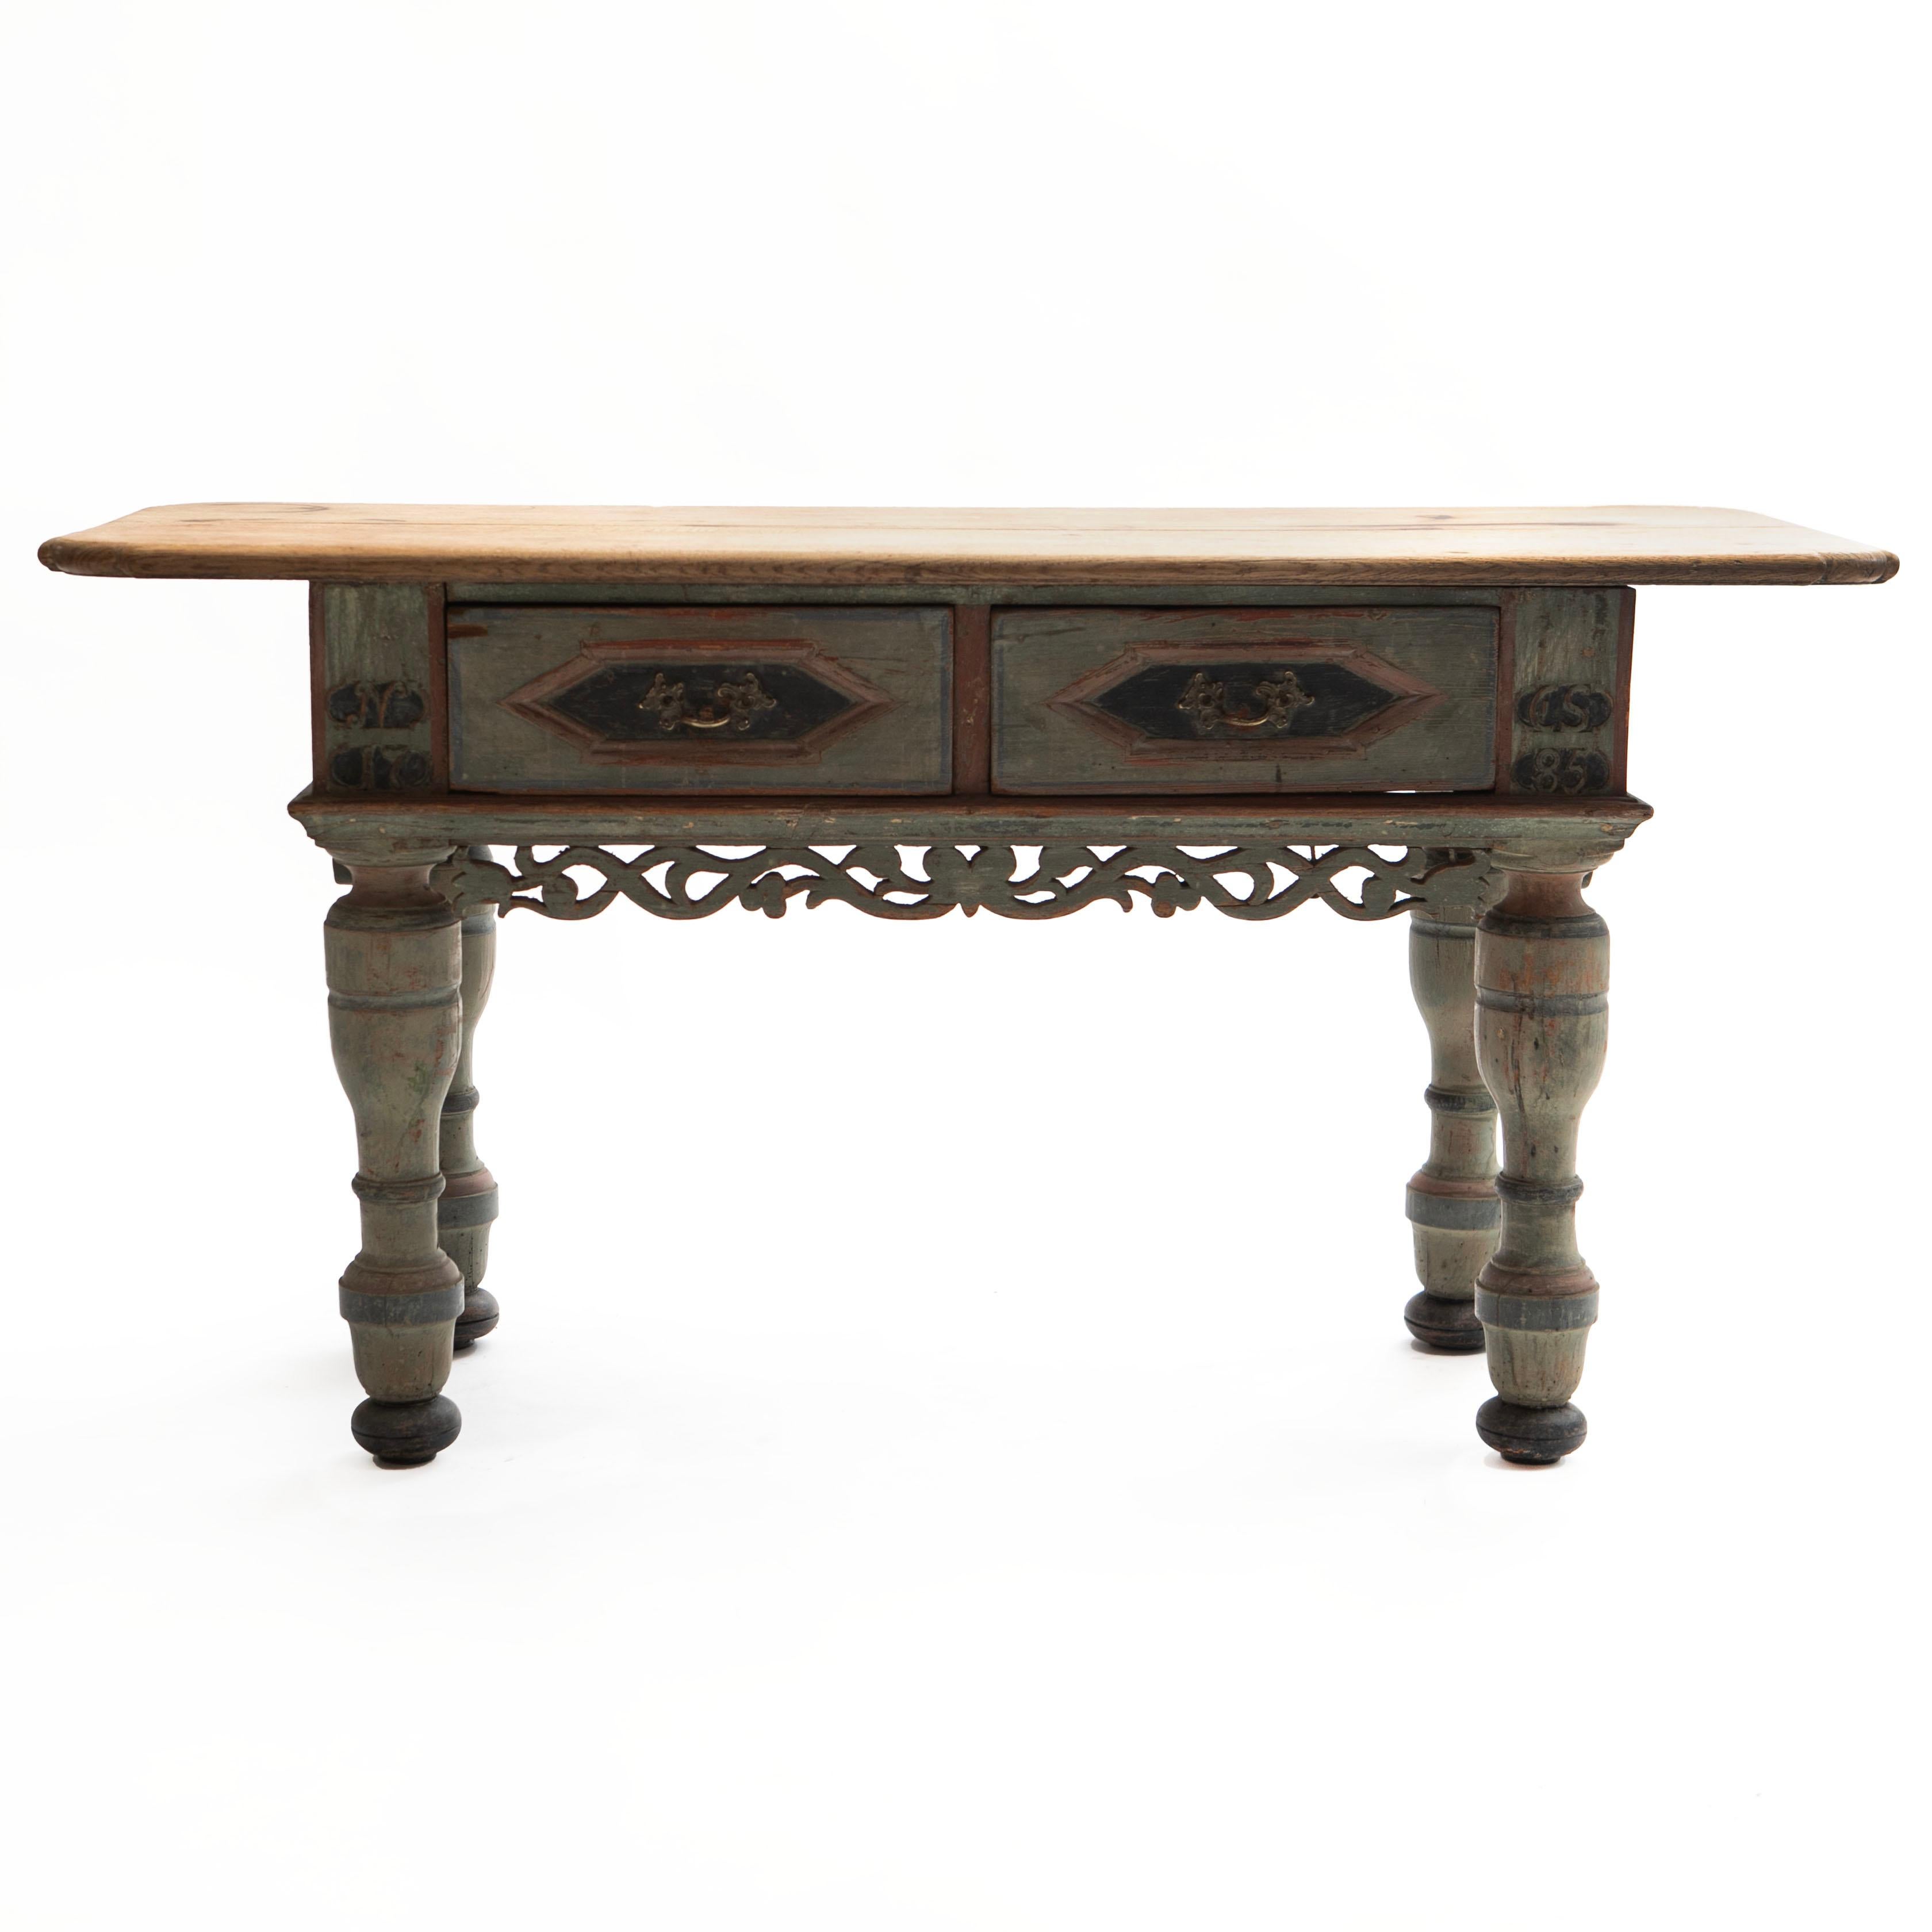 An extremely decorative 18th century Danish Baroque oak wood table.
The original light oak table top complements a frame in soft, original colors, showcasing a stunning authentic patina and natural distress.

The apron features two drawers and a